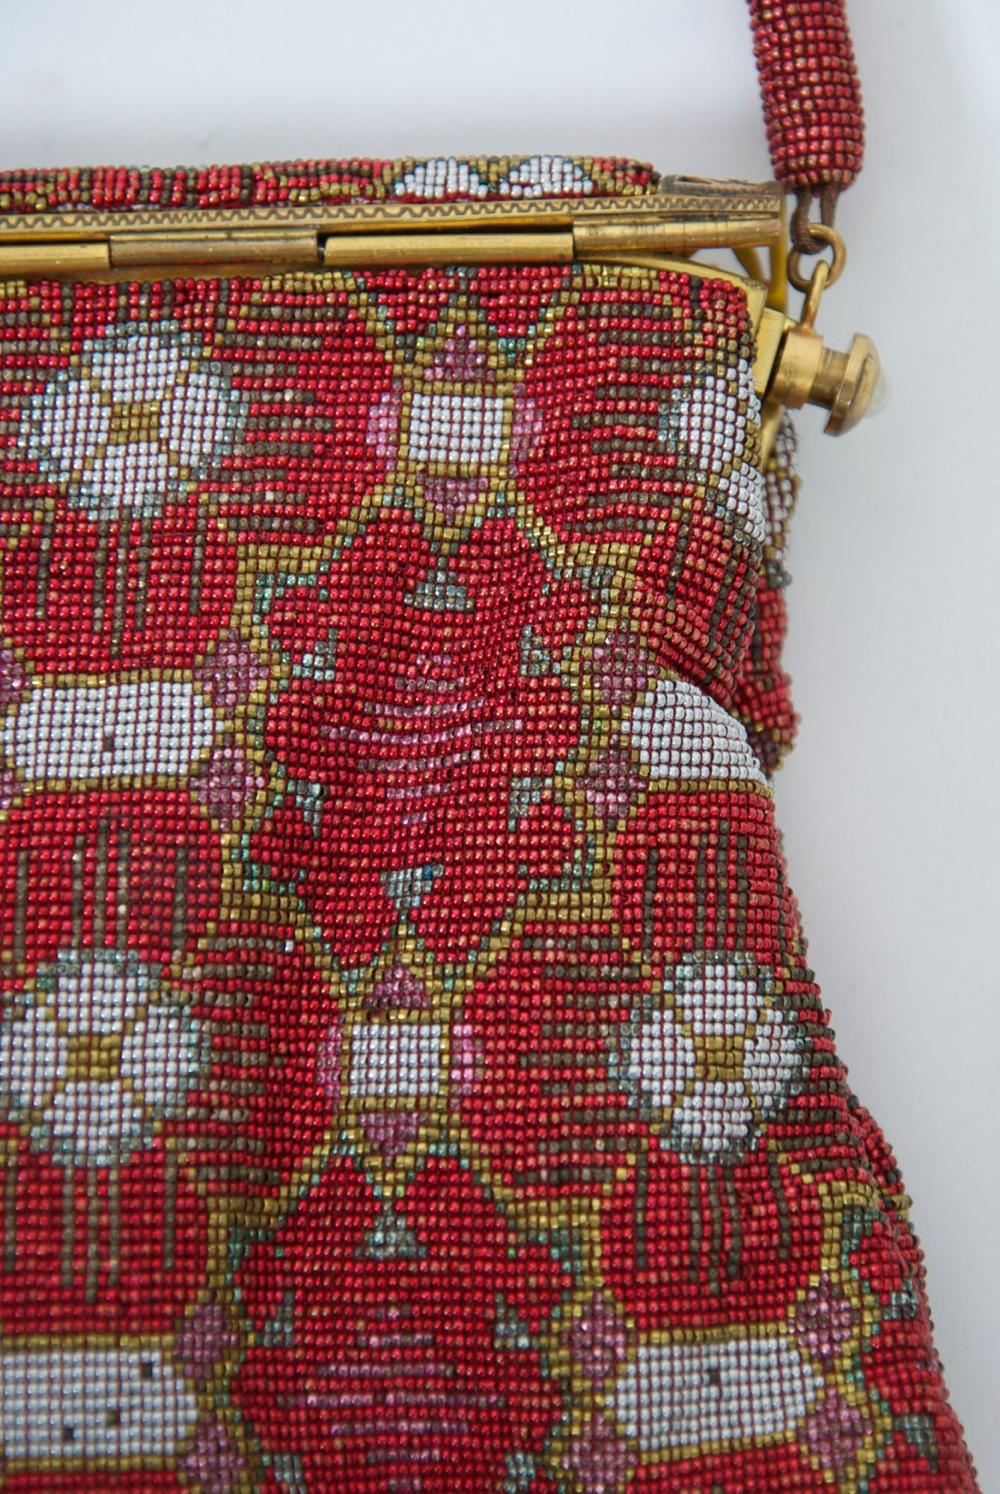 Brown Red Beaded Evening Bag, France